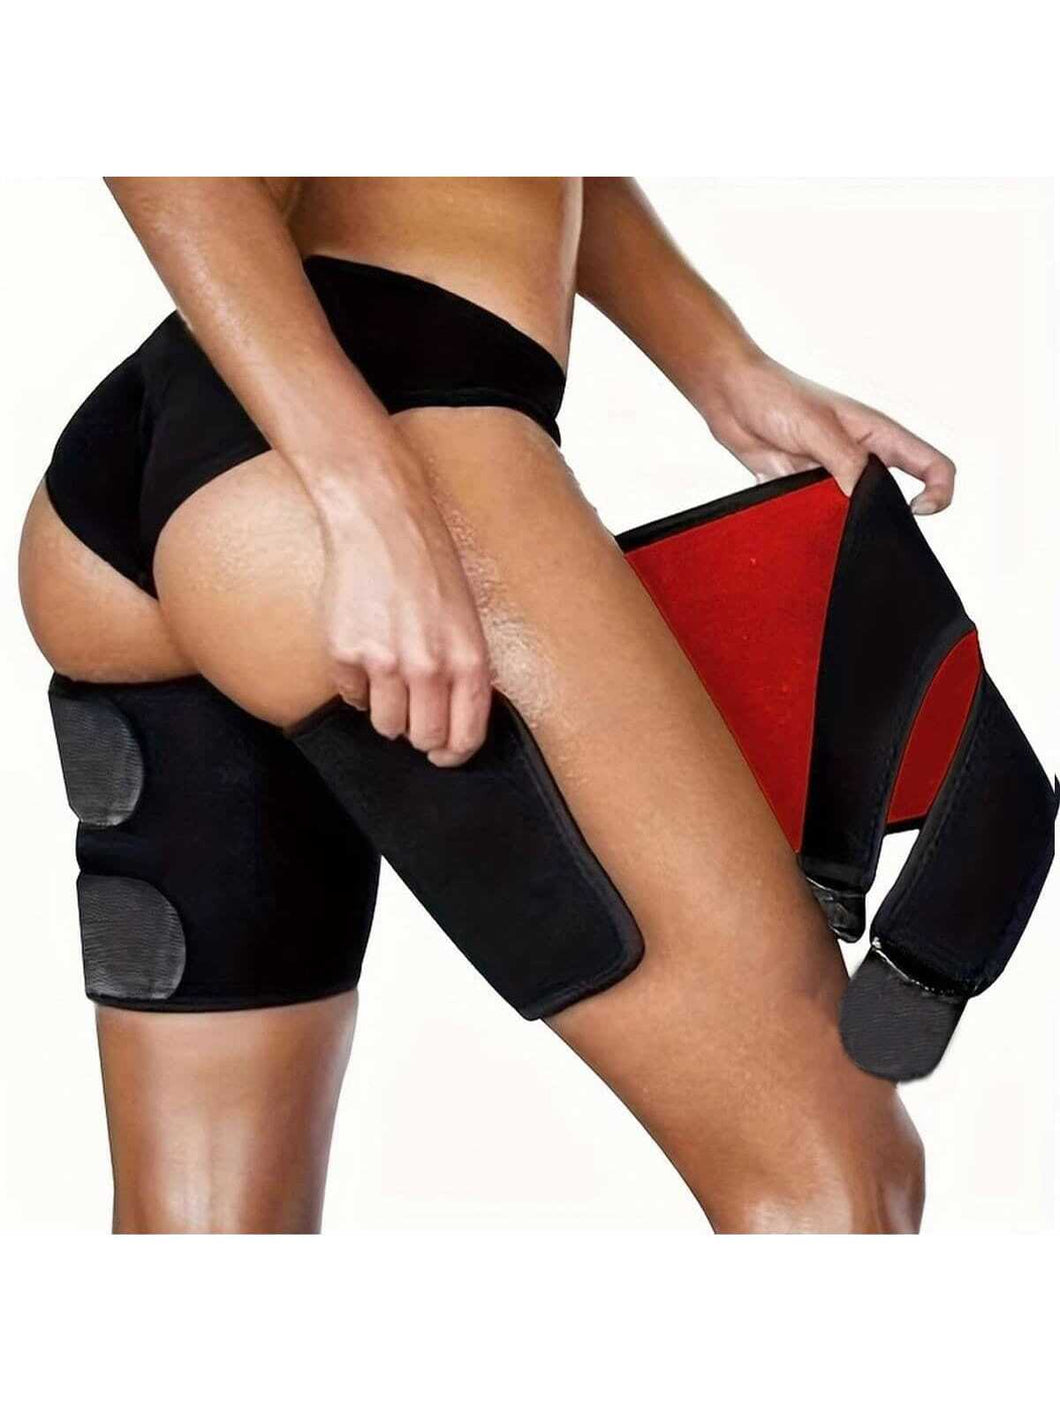 Leg Stretcher With Control Master For Ankle Ligament Stretching